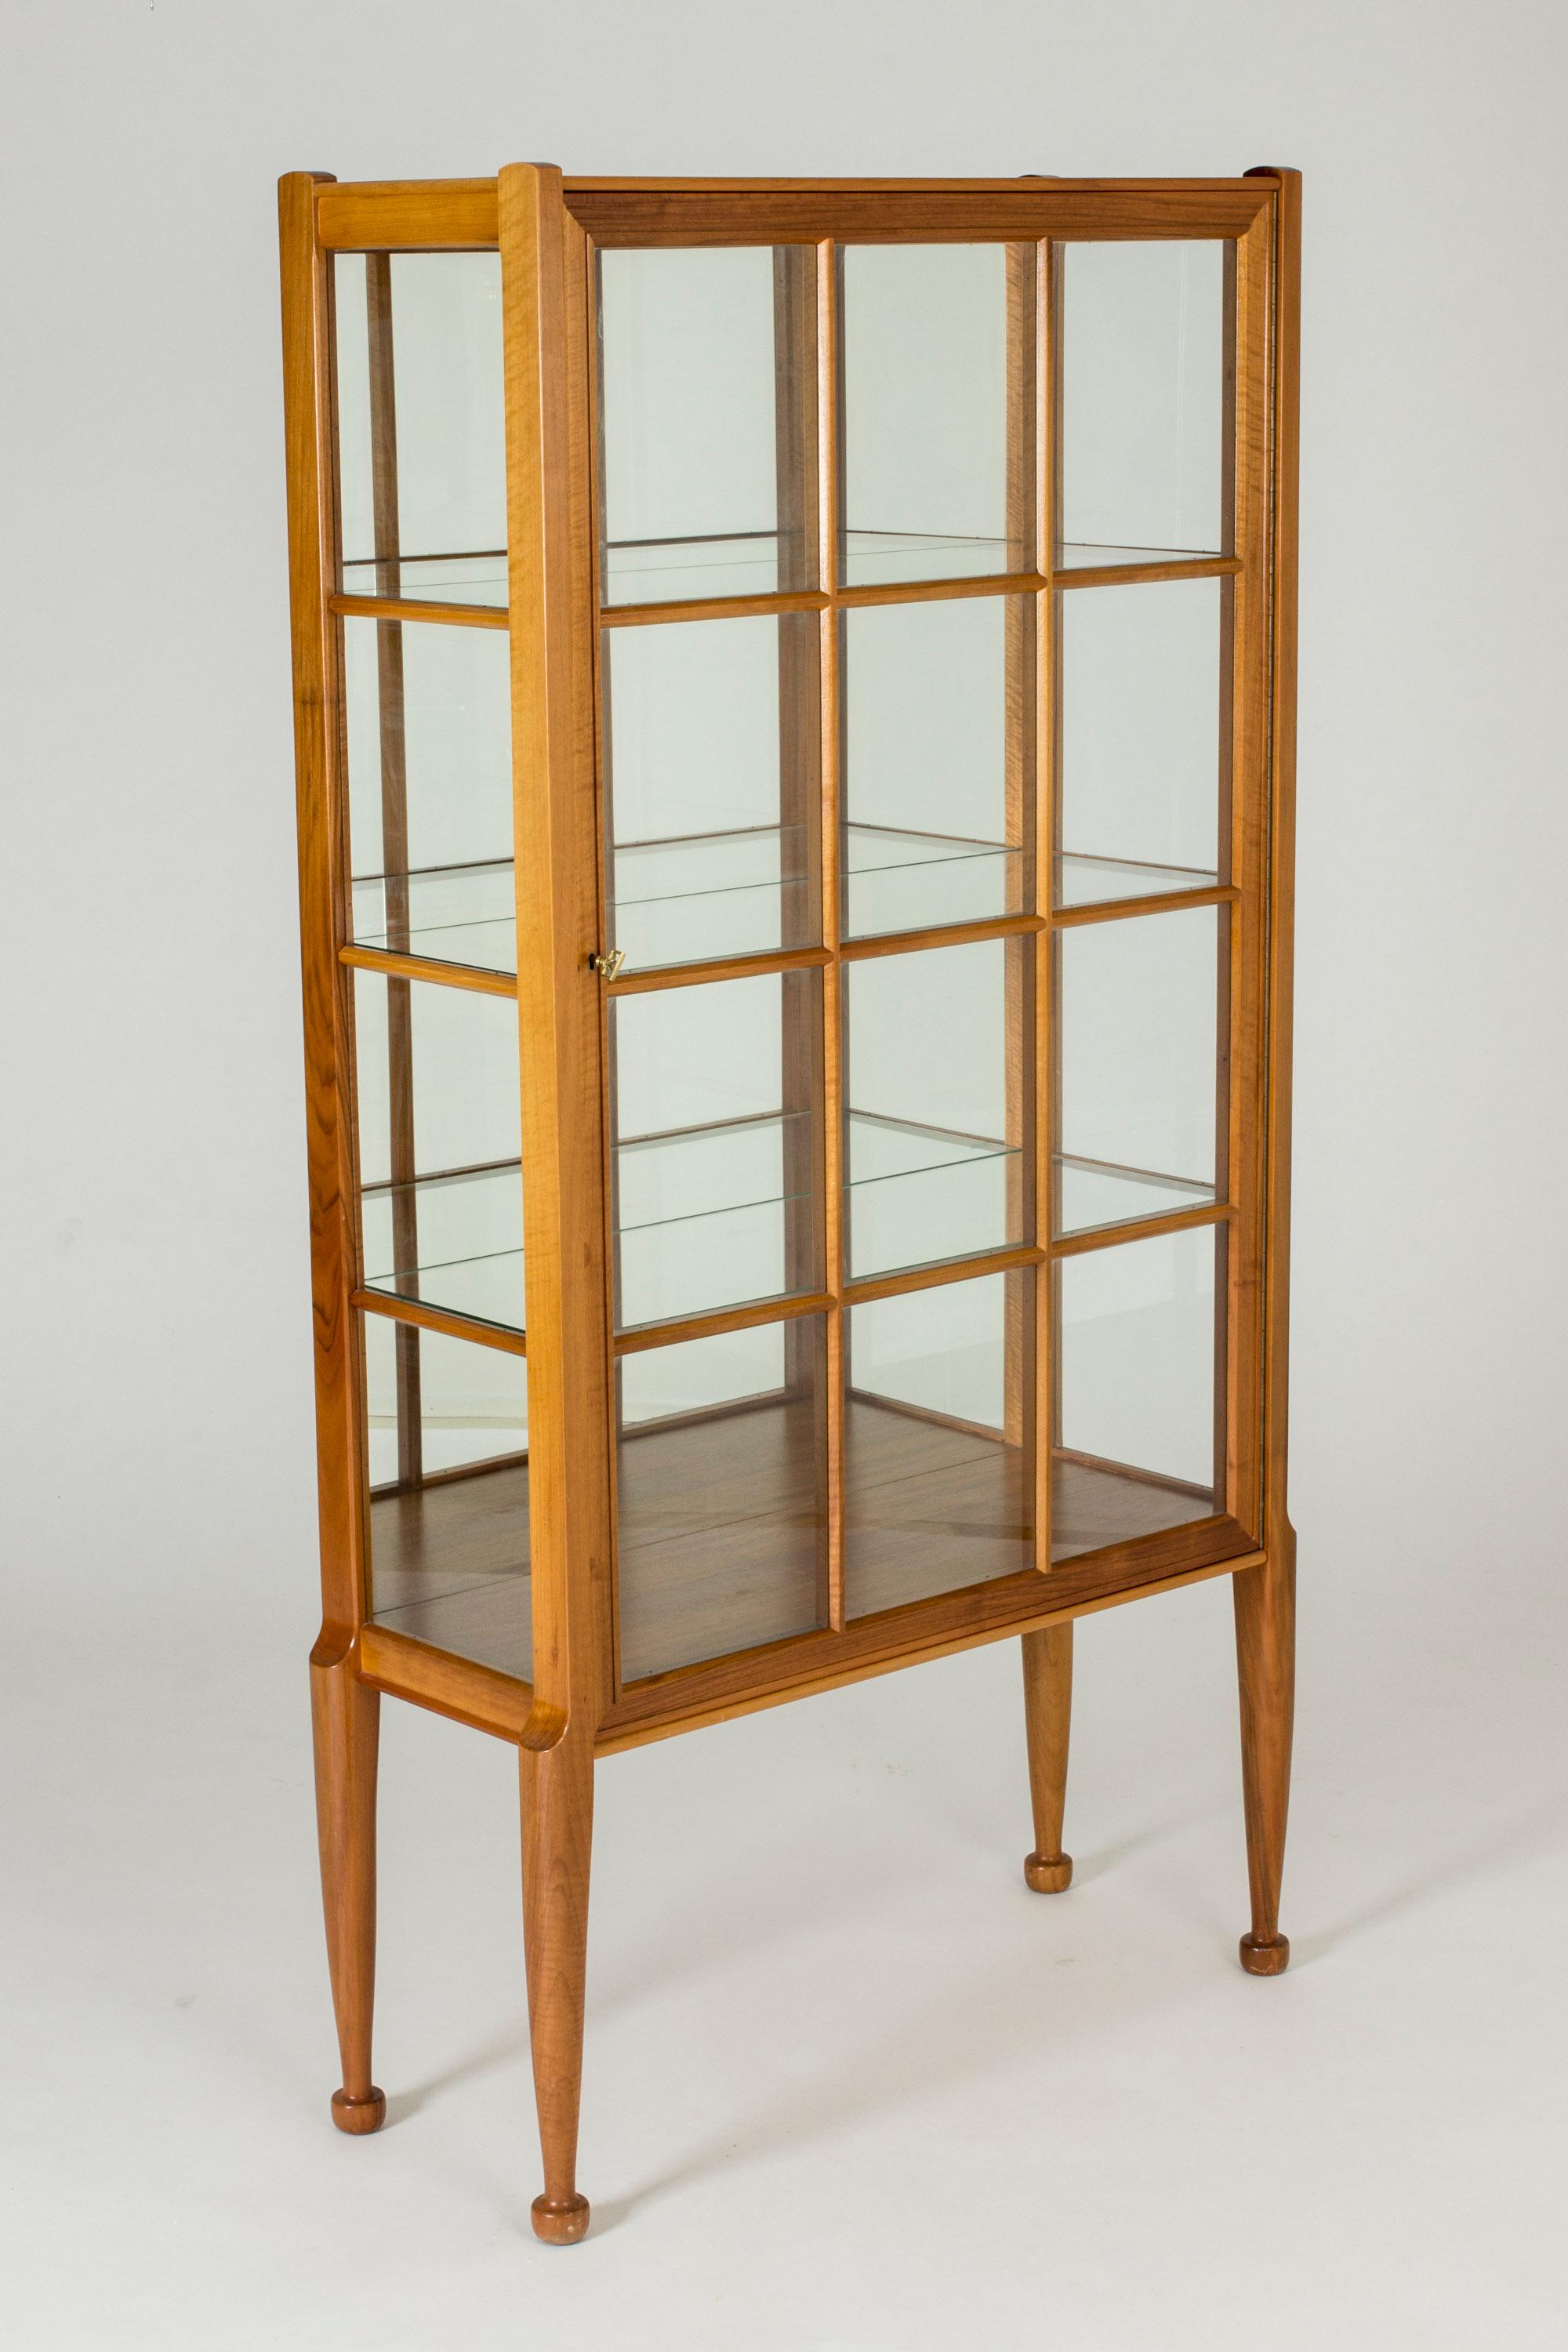 Beautiful, rare vitrine cabinet by Josef Frank, made in mahogany and glass. Mirrored glass reflects objects placed on the clear glass shelves. Sculpted feet, elegant smooth lines.